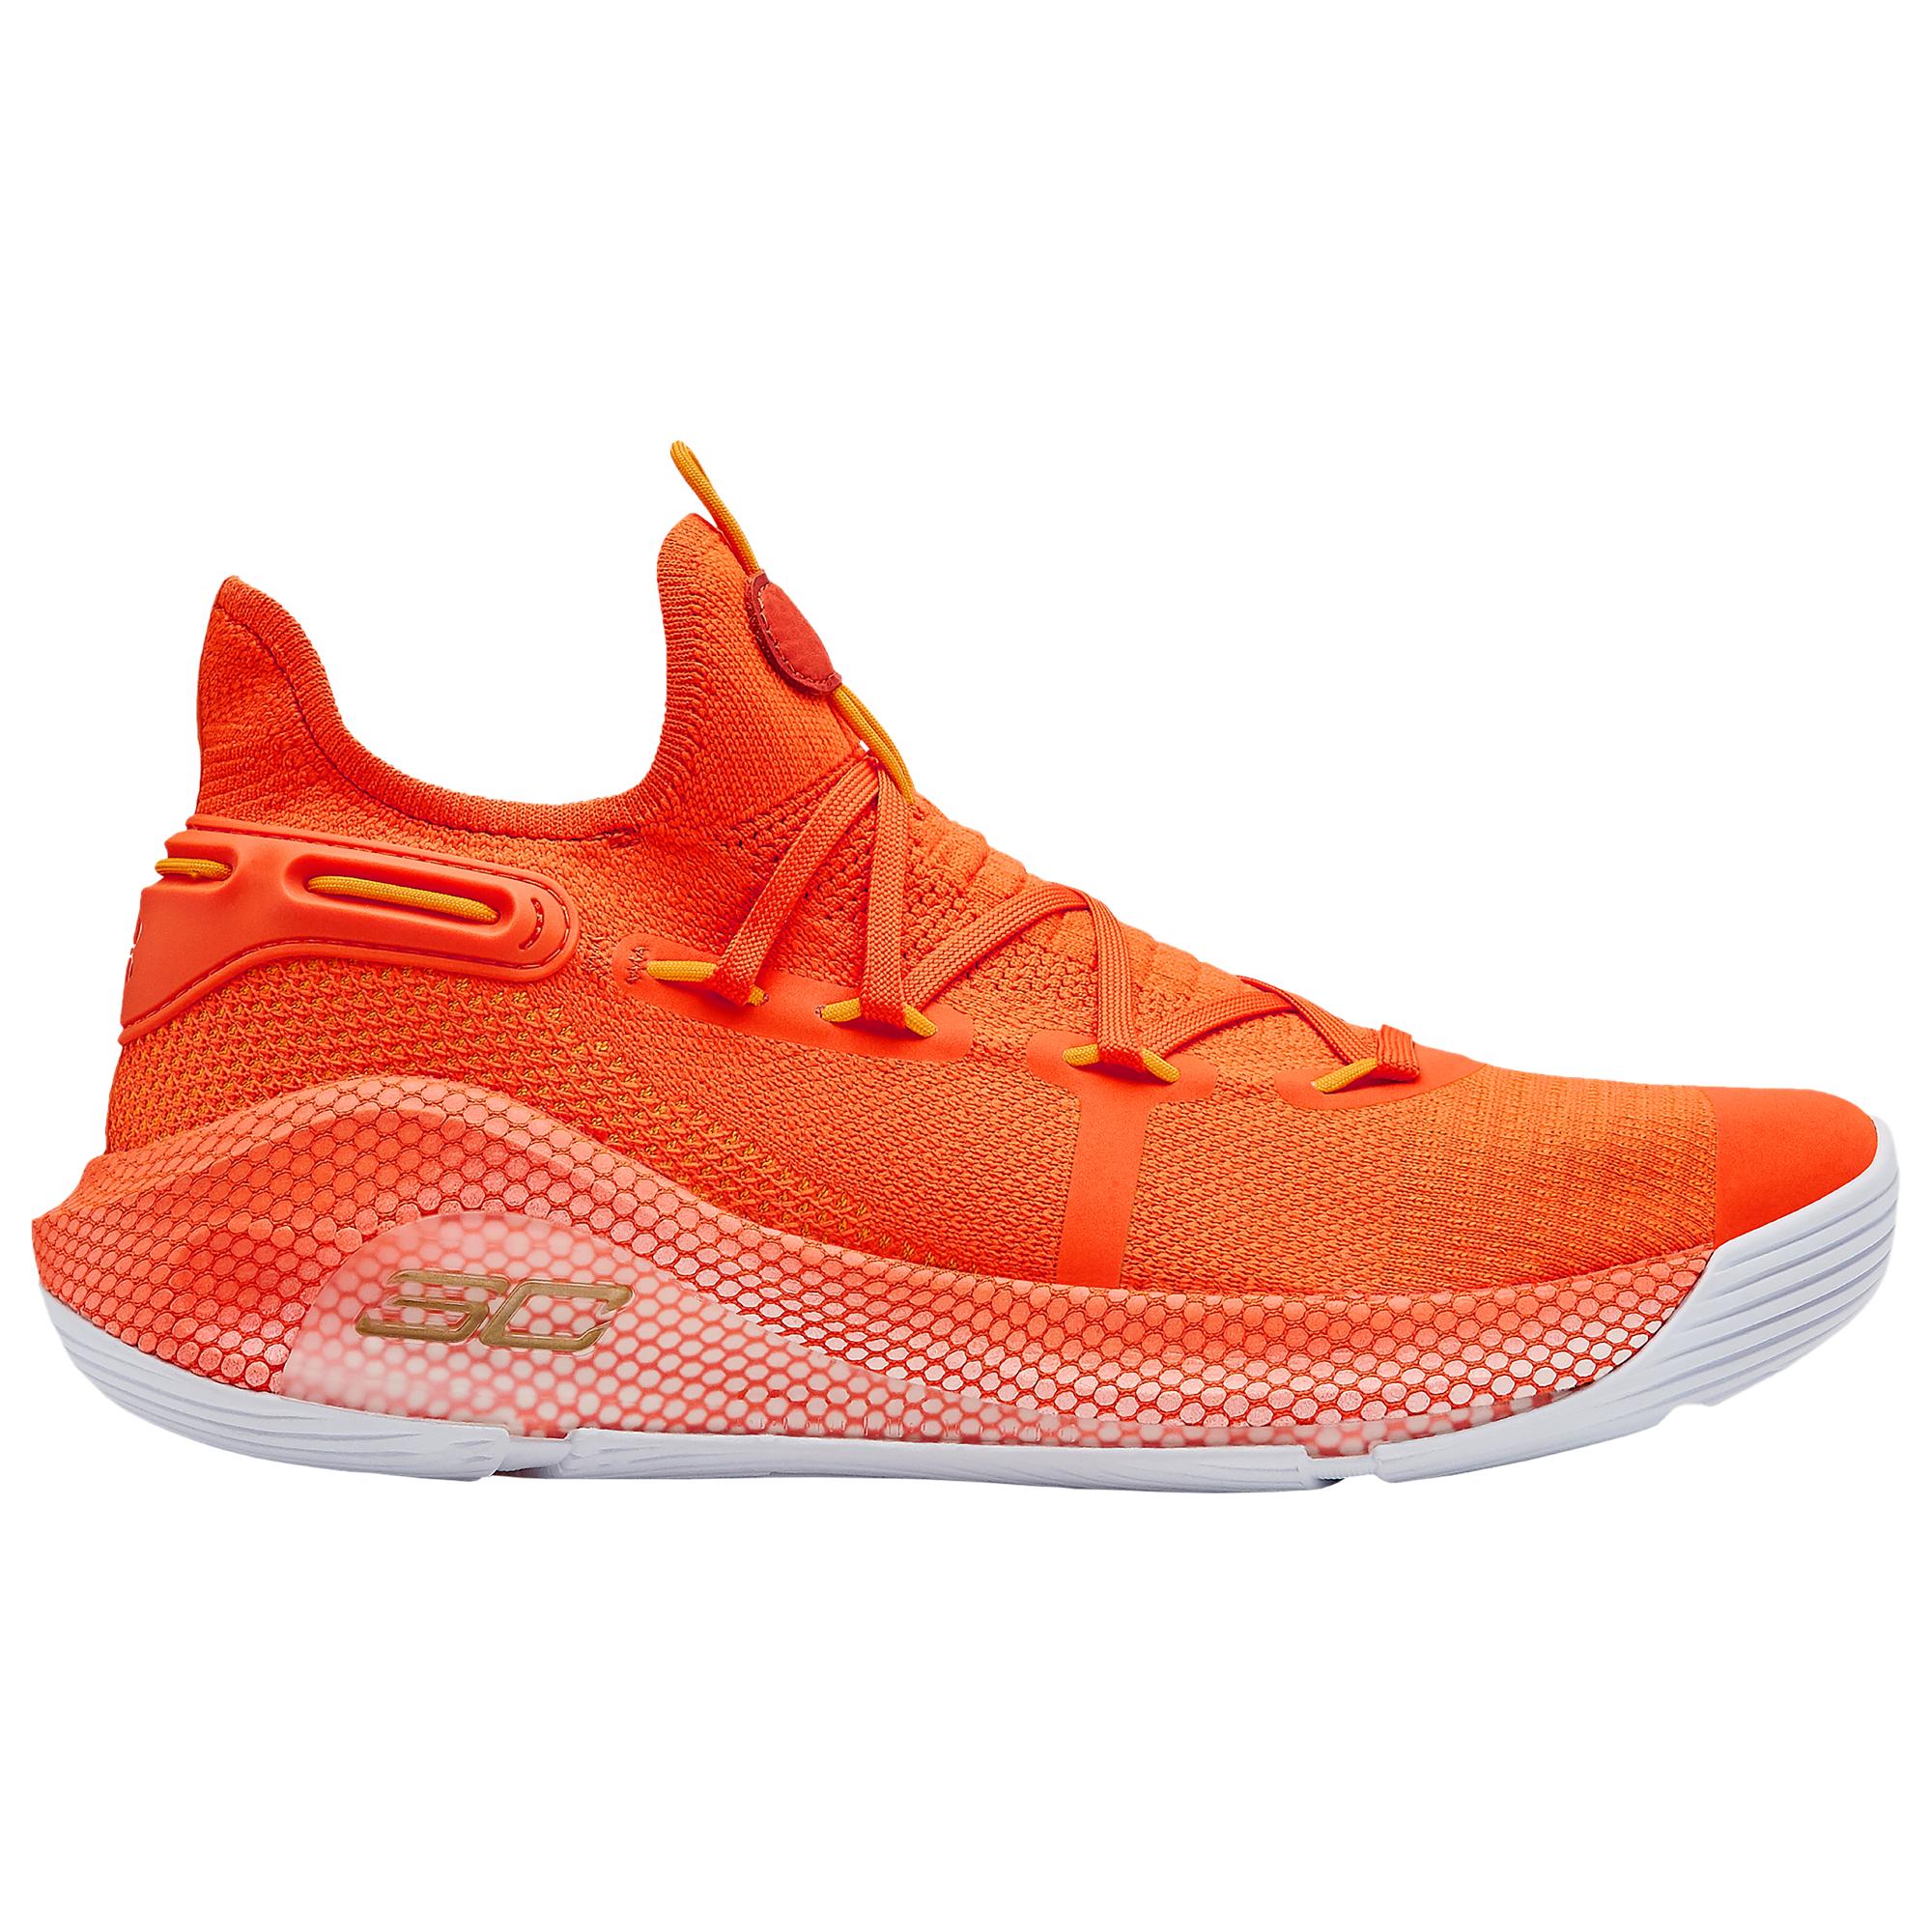 Under Armour Rubber Curry 6 Basketball Shoes in Orange for Men - Lyst